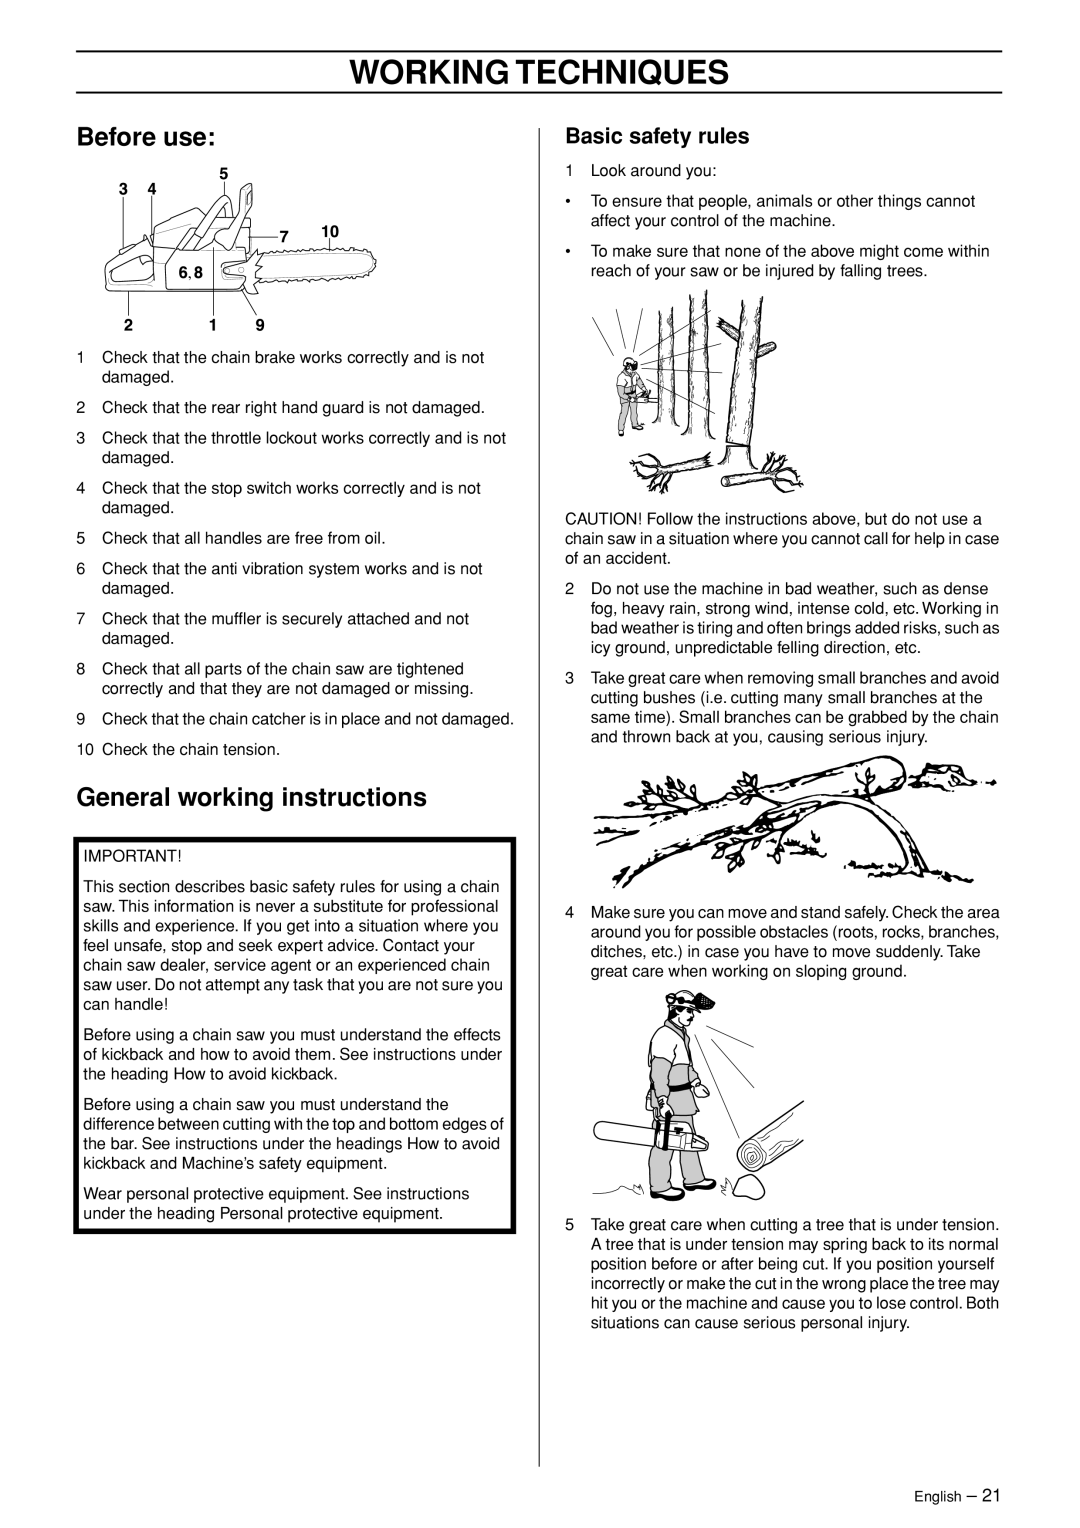 Jonsered CS 2153 manual Working Techniques, Before use, General working instructions, Basic safety rules 